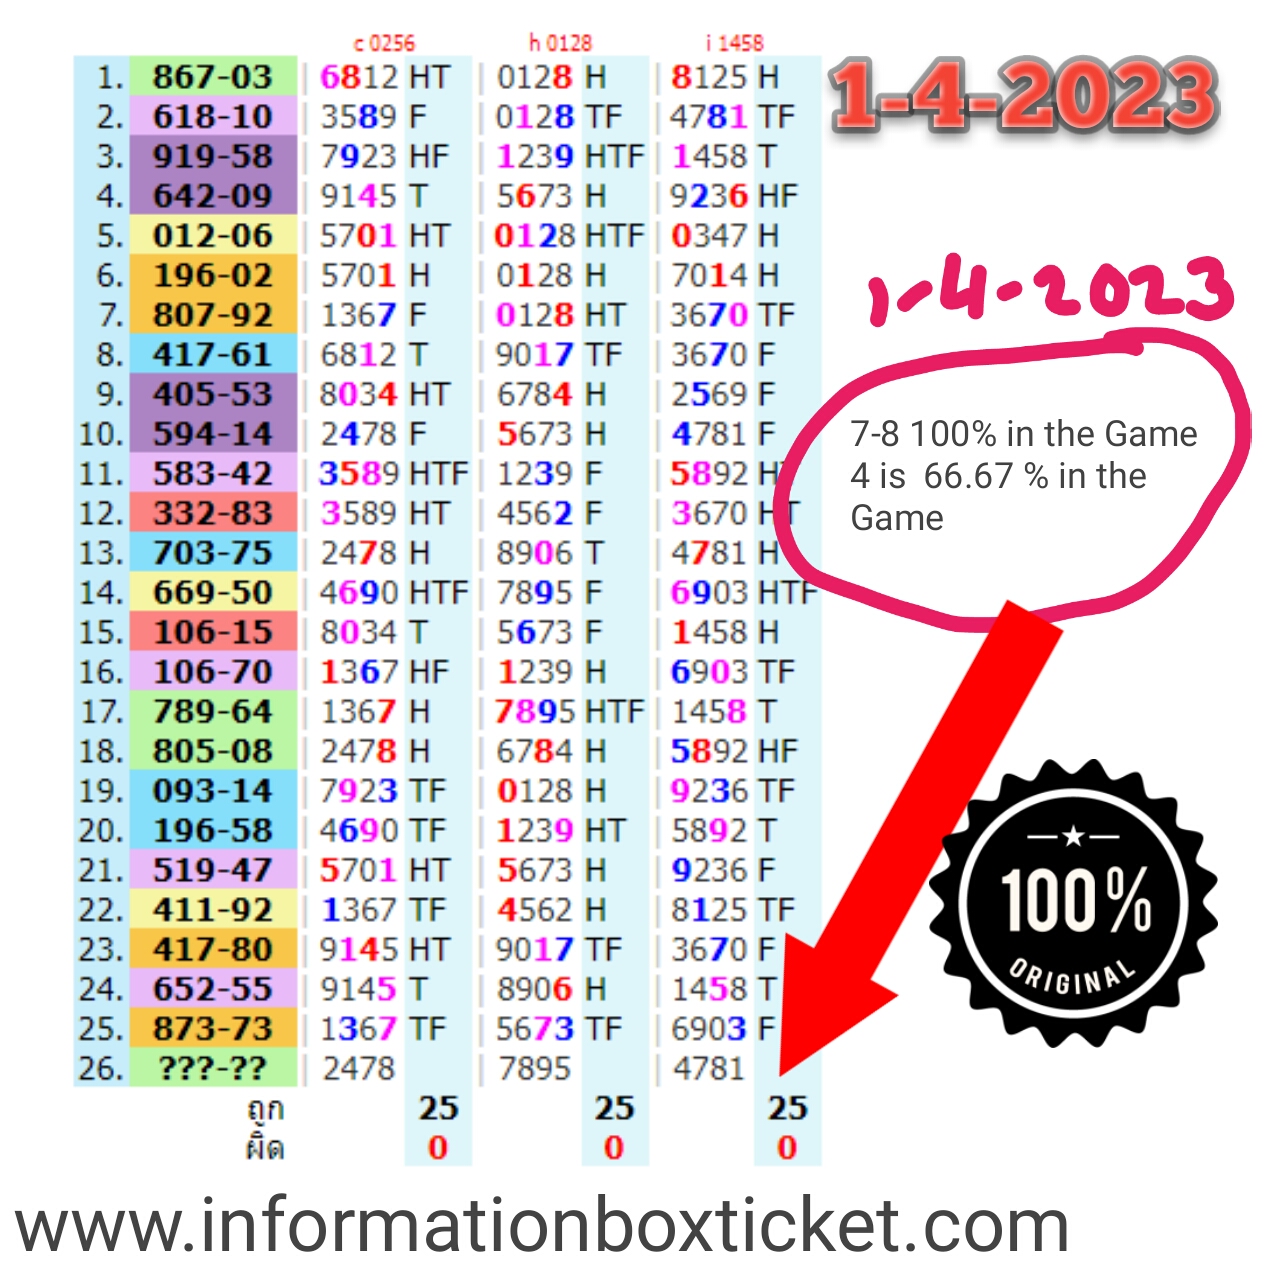 THAILAND LOTTERY MAGIC WIN TIP OHIO USA   SPECIAL FOR 1-4-2023